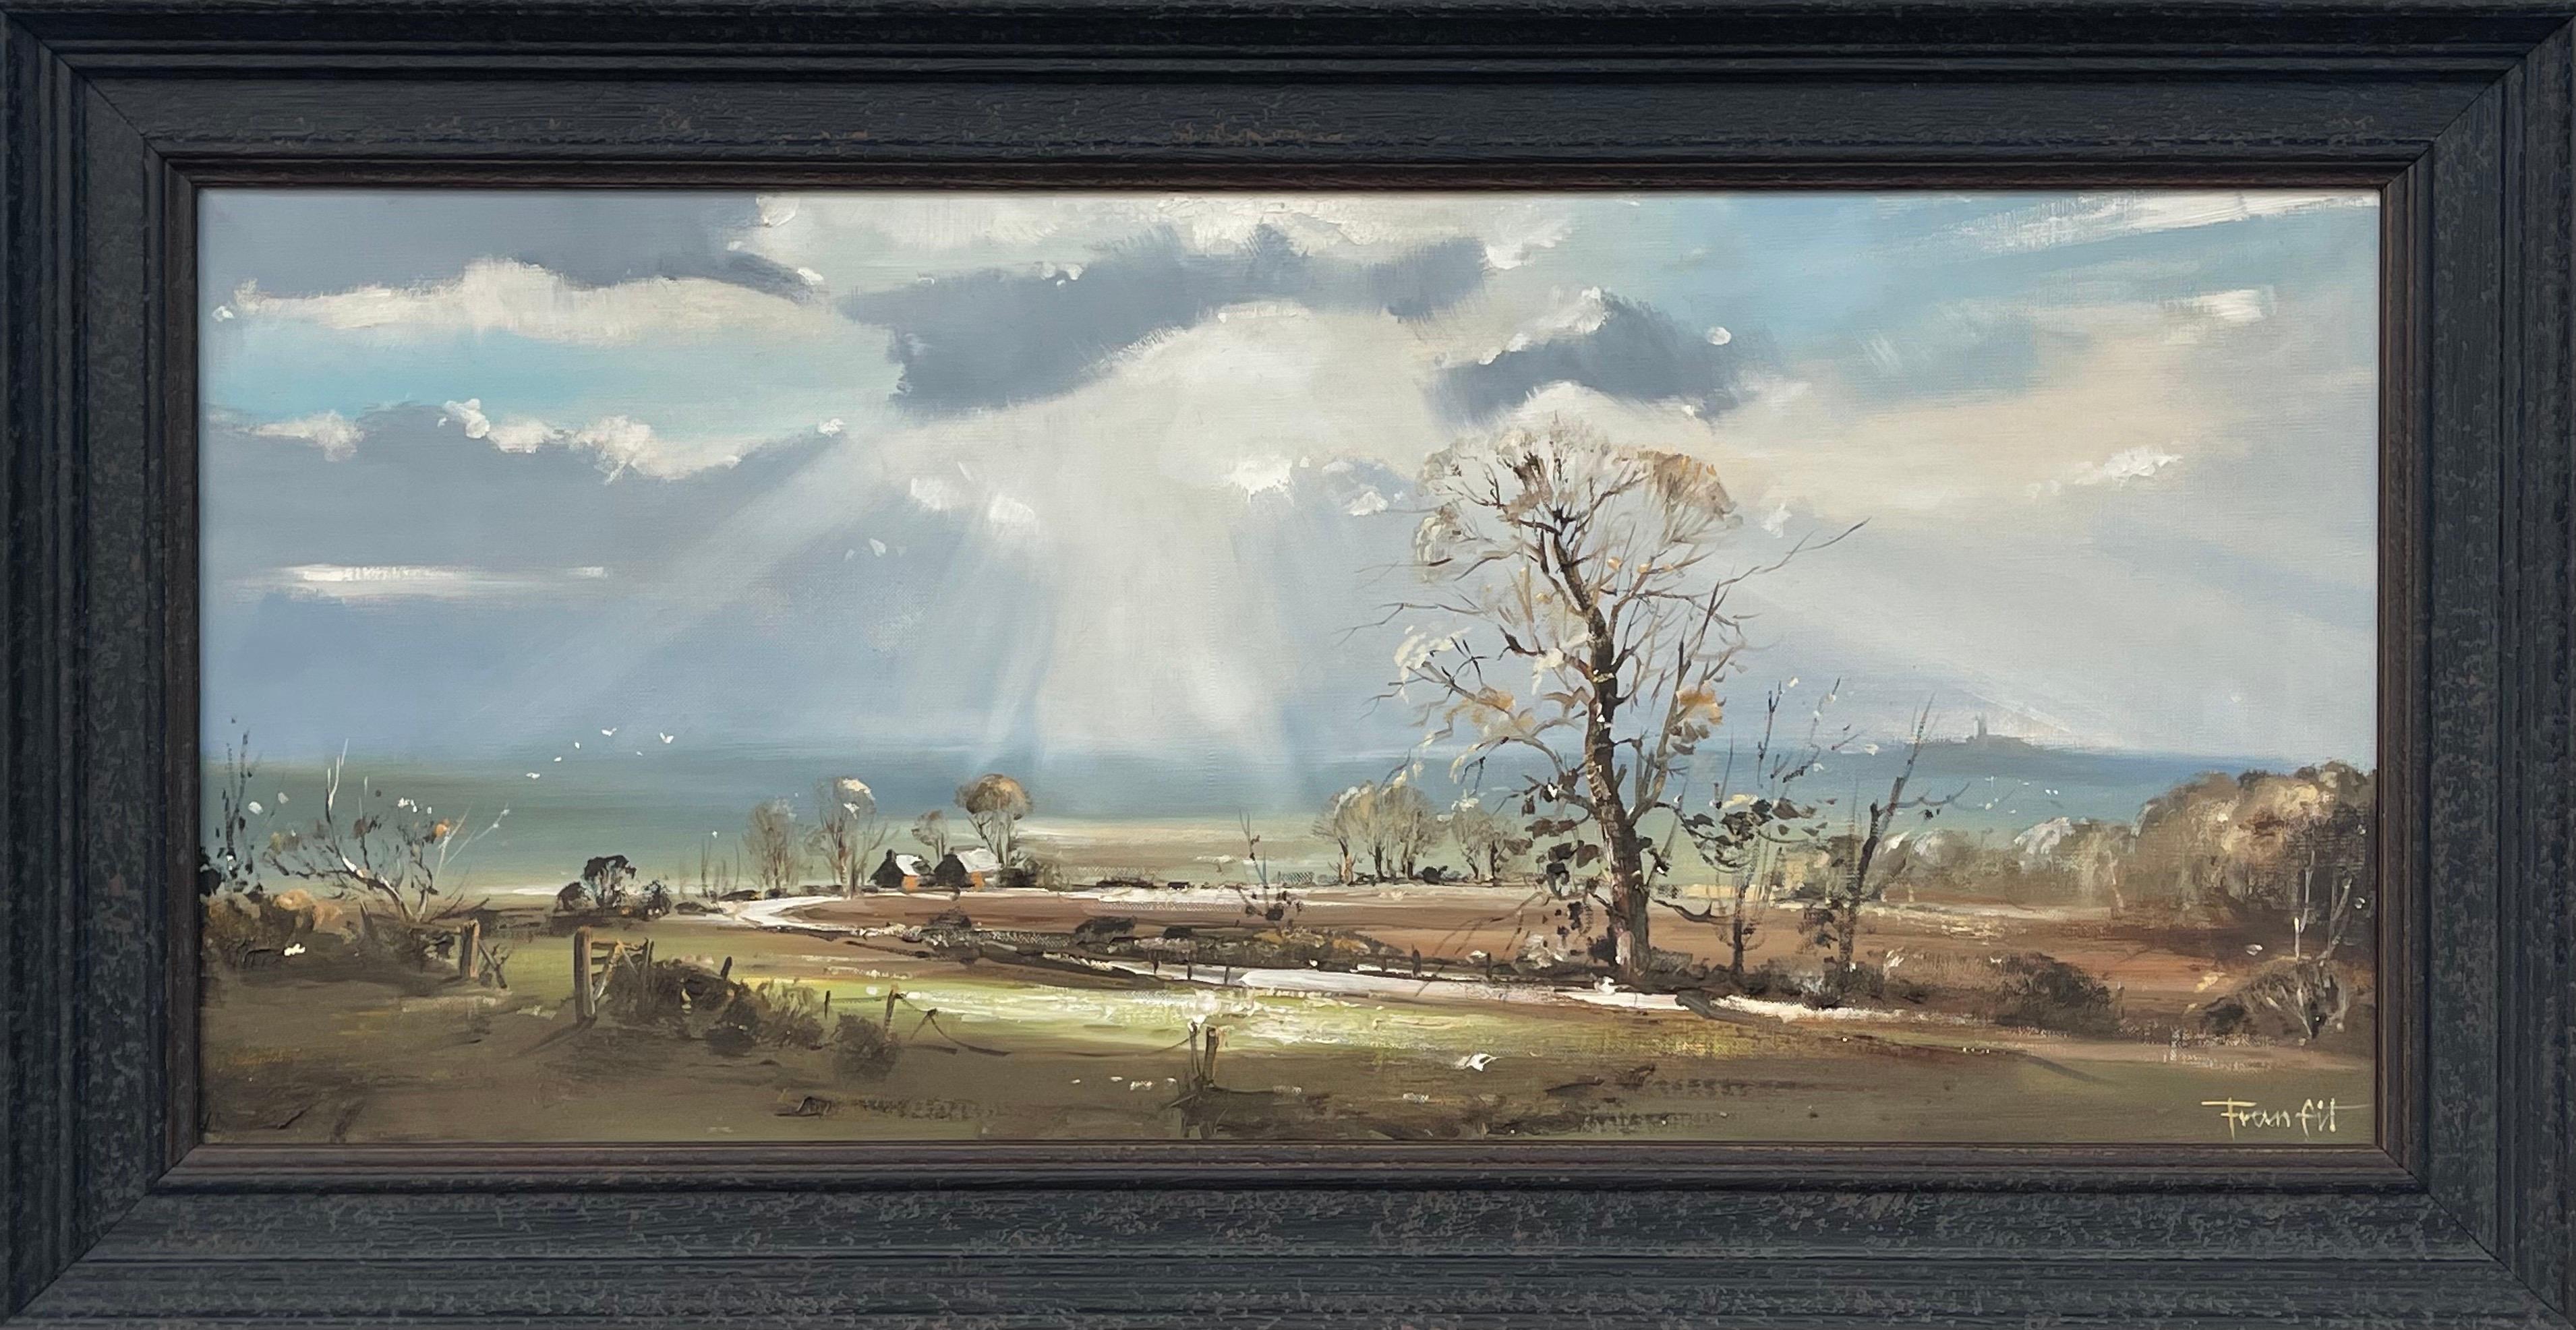 Frank Fitzsimons Landscape Painting - Ireland Landscape with Trees, Buildings & Sun Rays by Contemporary Irish Artist